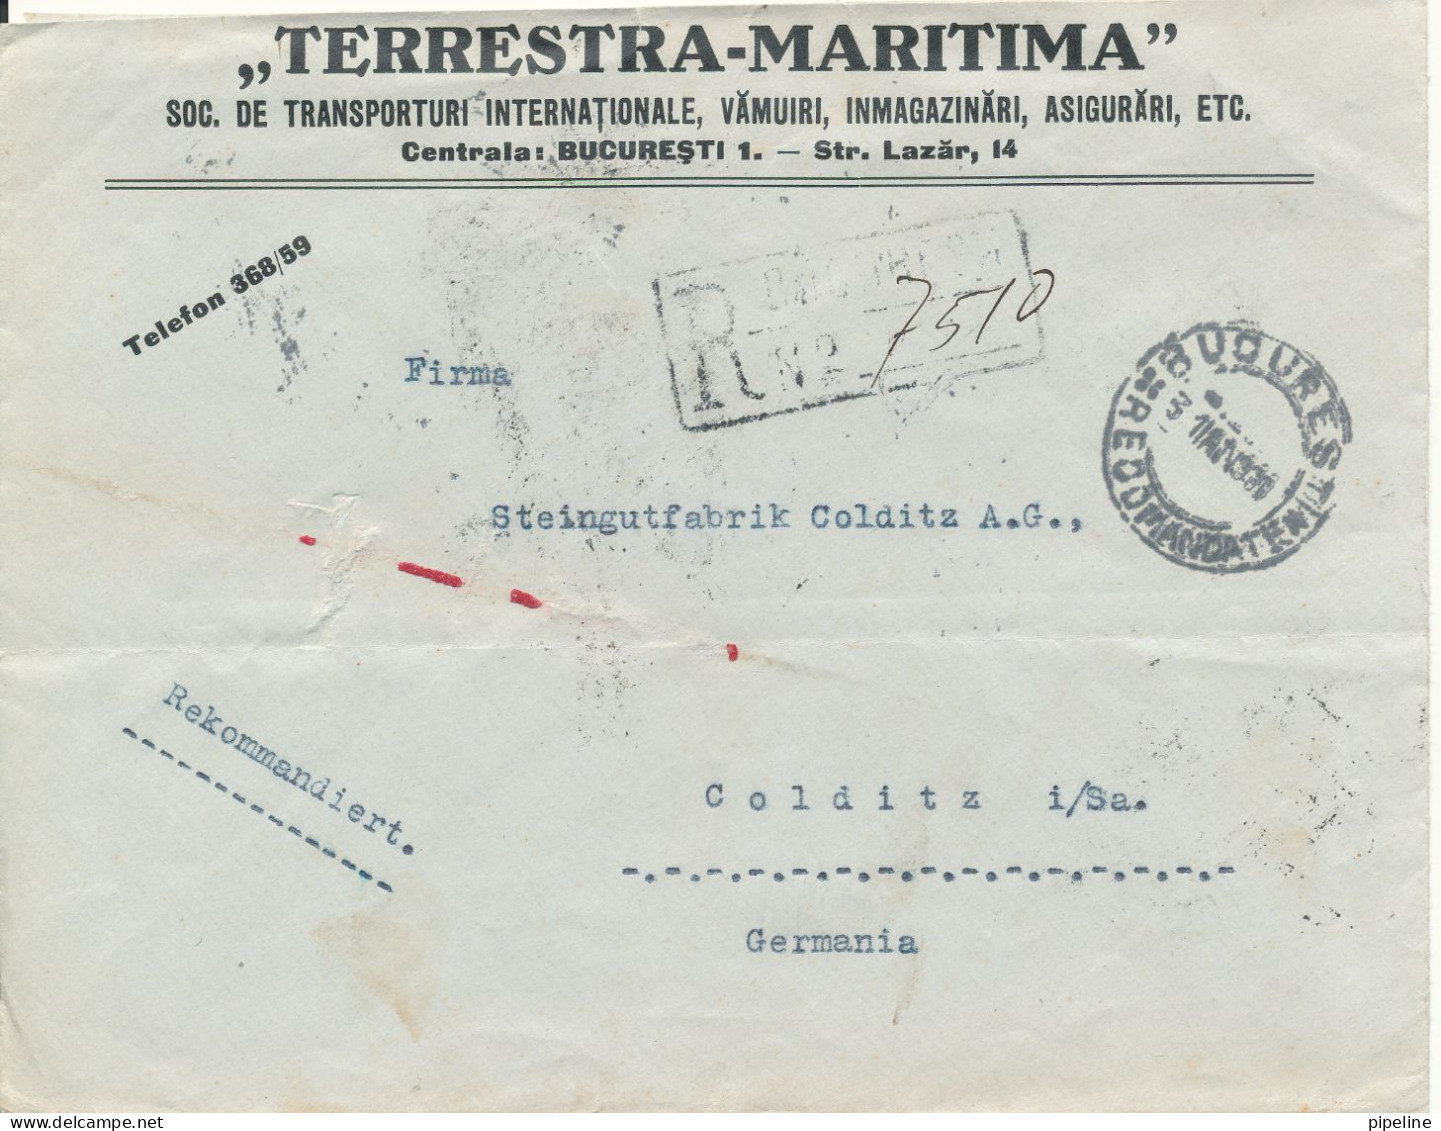 Romania Registered Cover Sent To Germany 31-1-1930 On The Backside Bahnpost Breslau - Beuthen Zug 32 2-2-1930 - Covers & Documents